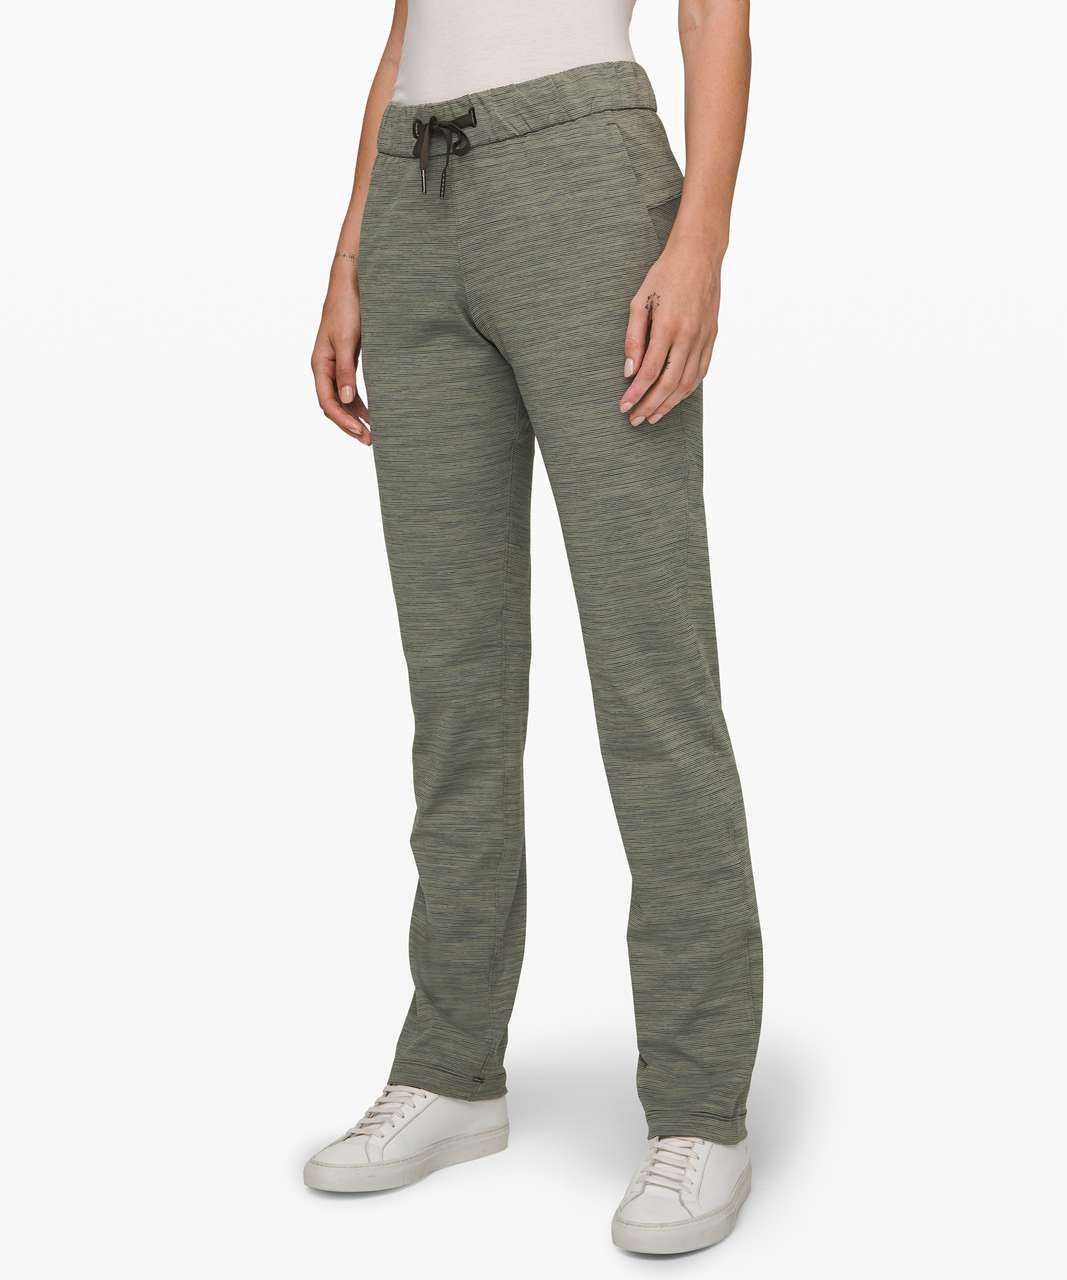 Lululemon On the Fly Pant Full Length - Wee Are From Space Sage Dark Olive  - lulu fanatics